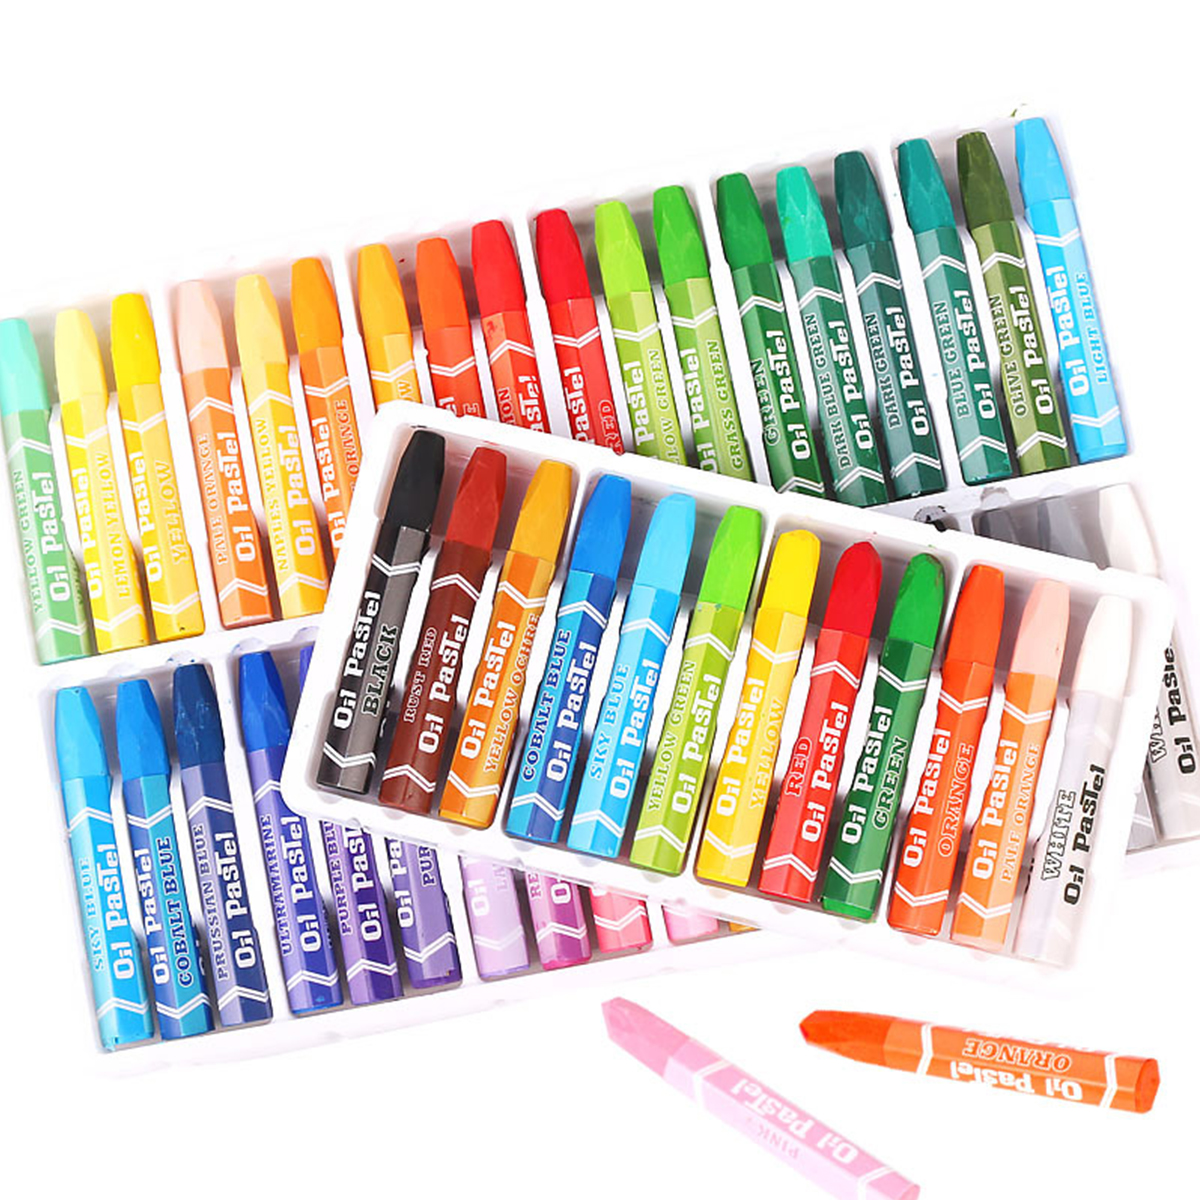 

12/18/24/36 Colors Oil Pastels Non-Toxic Crayon Drawing Painting Pens Artists Students Art Supplies Gifts for Childrens